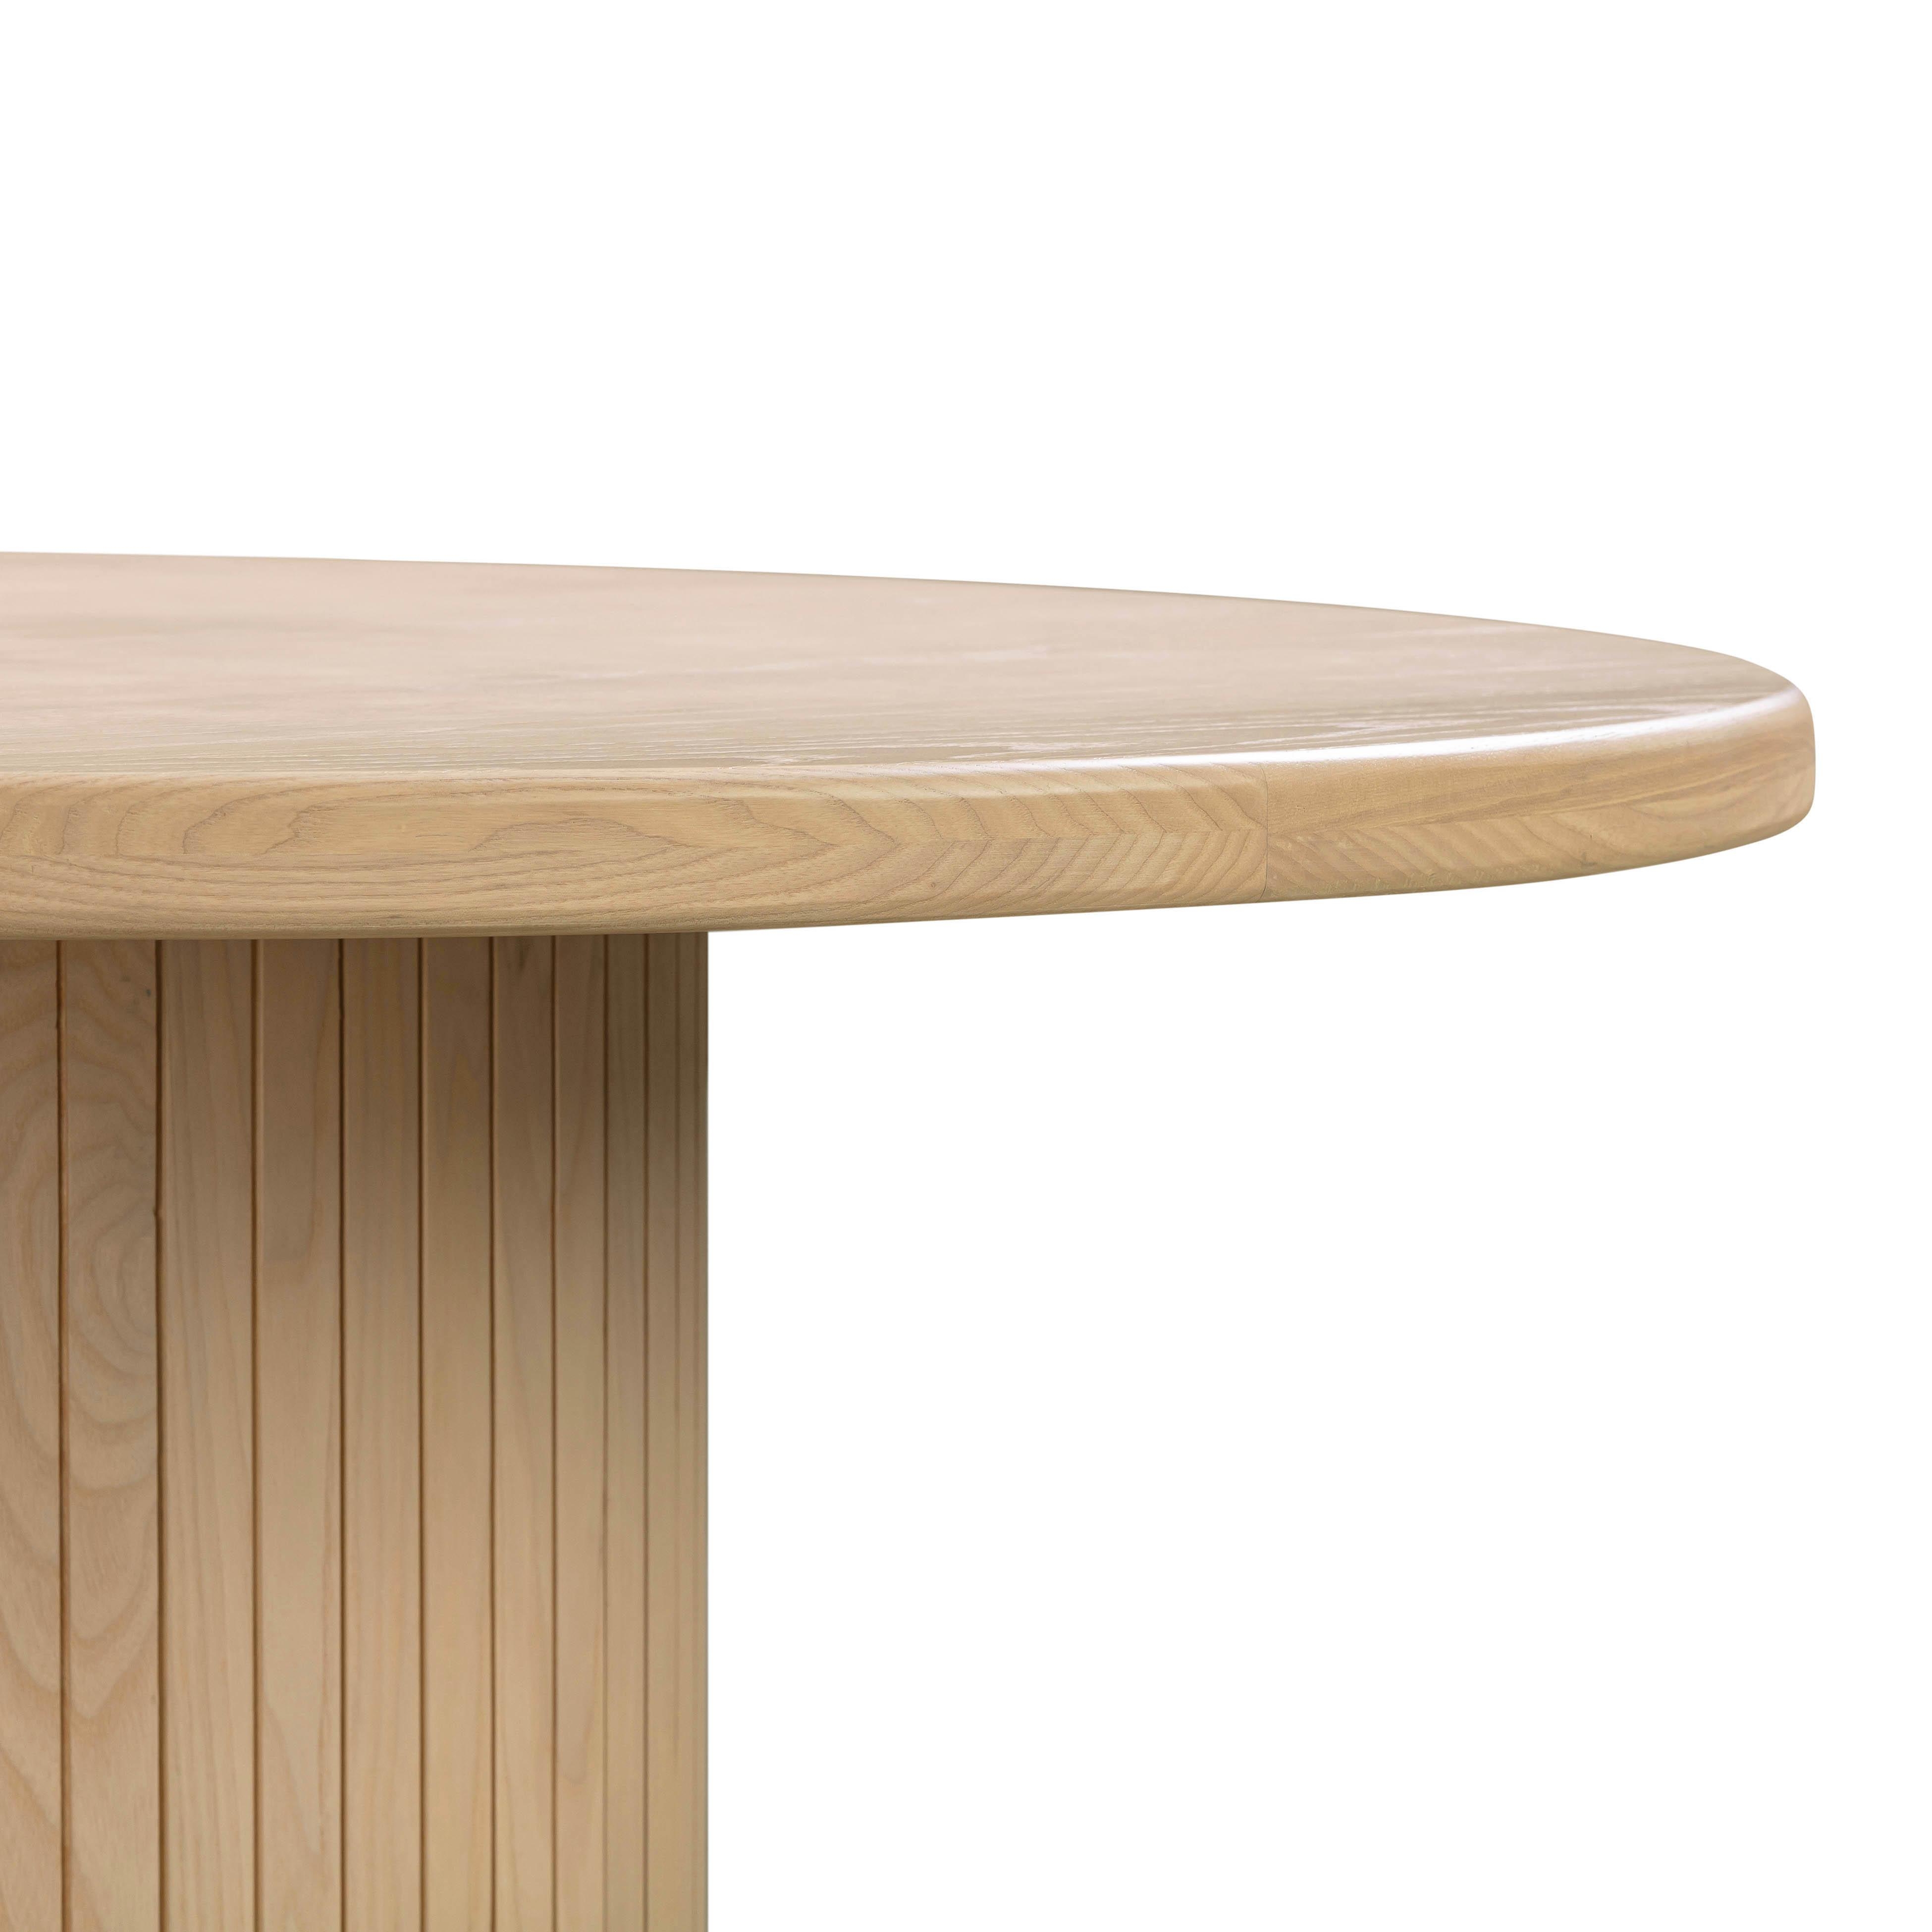 Chelsea Oak Wood Round Dining Table - Image 3